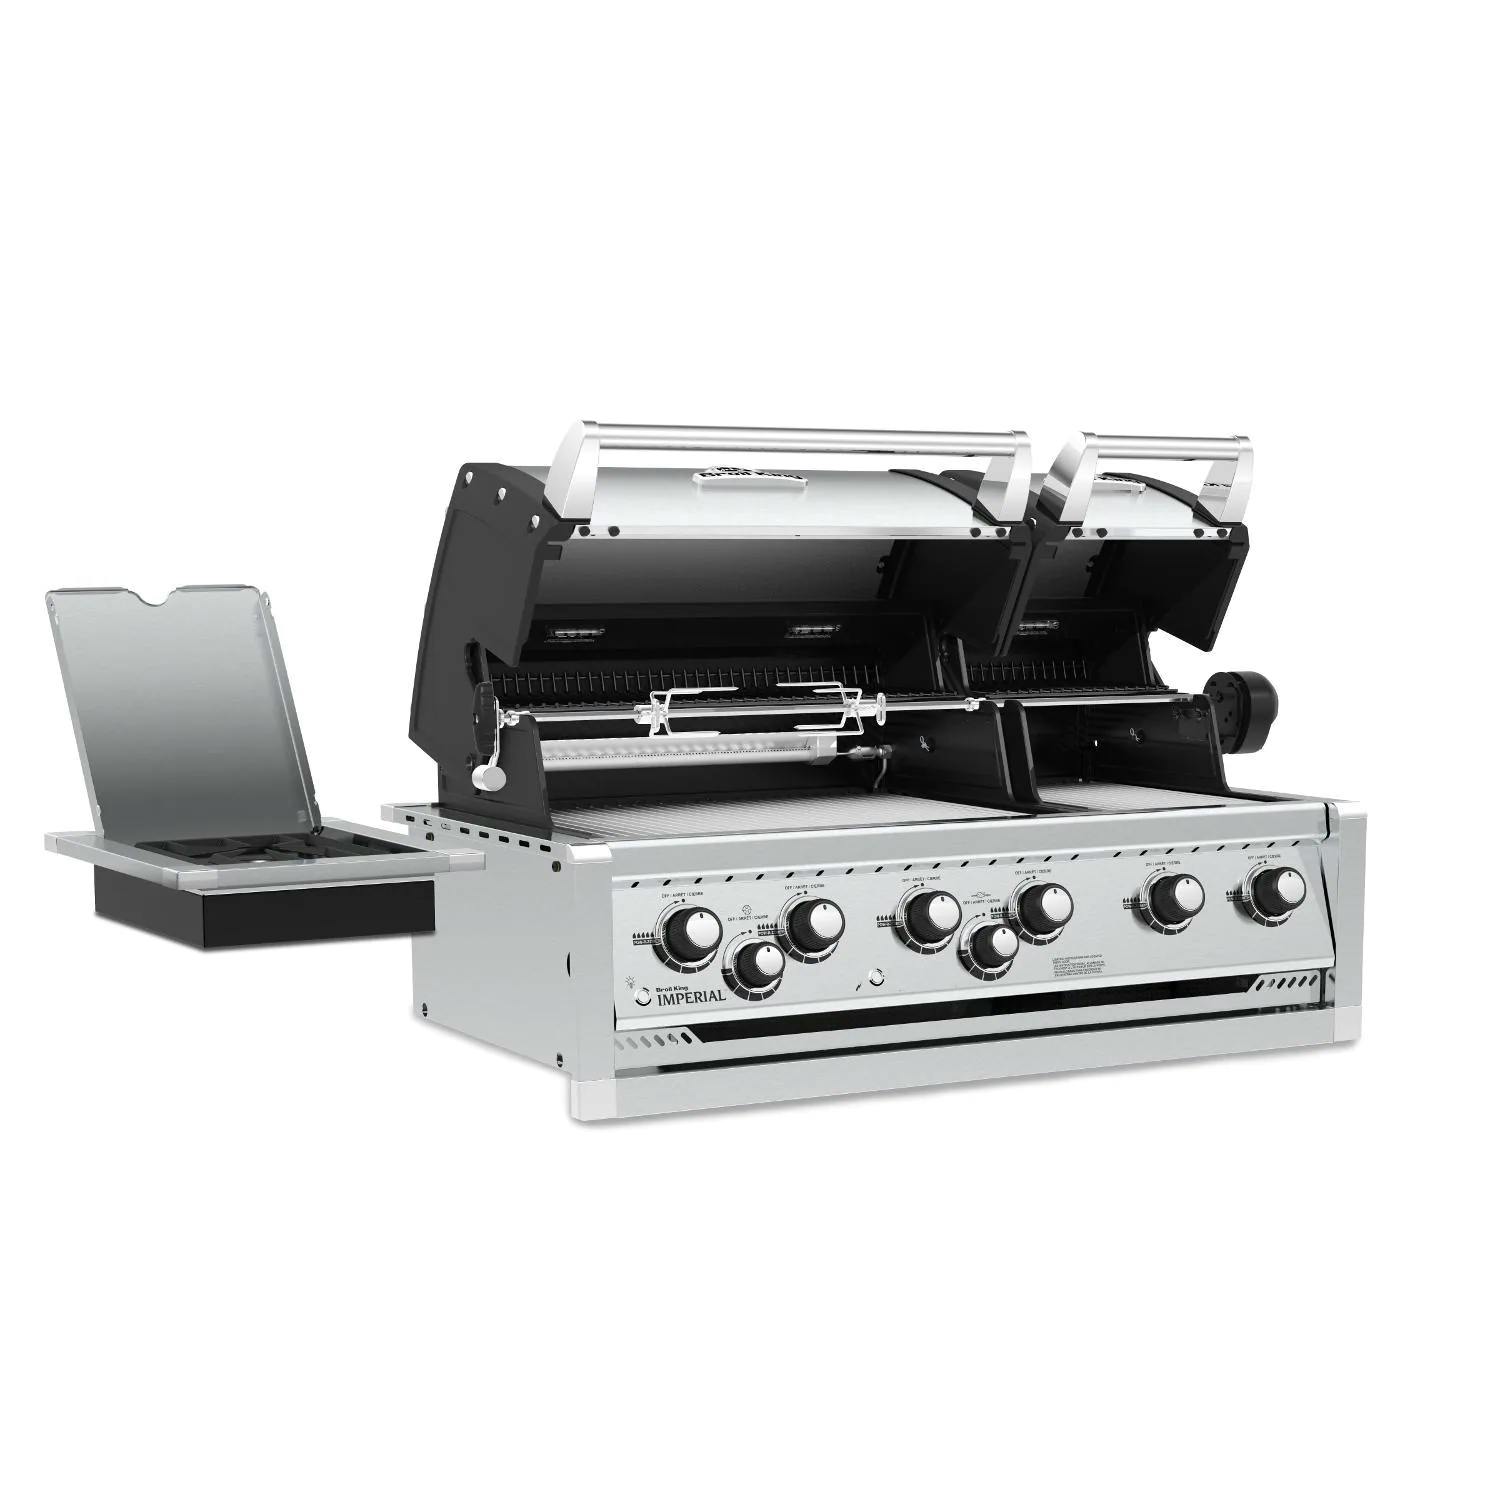 Broil King Imperial S Built-in Gas Grill with Rotisserie and Side Burner